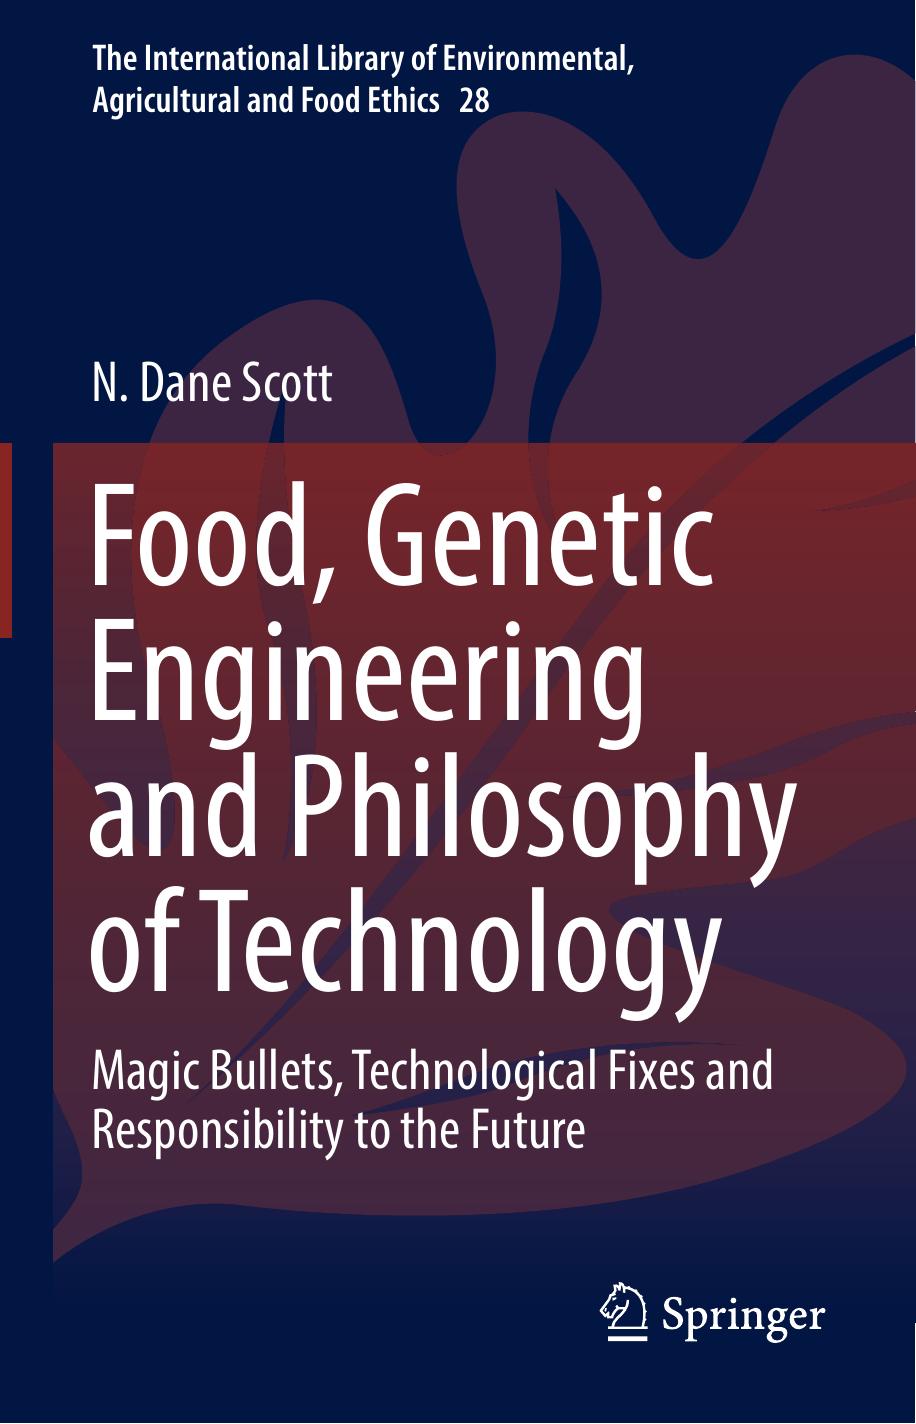 Food, Genetic Engineering and Philosophy of Technology  Magic Bullets, Technological Fixes and Responsibil 2018